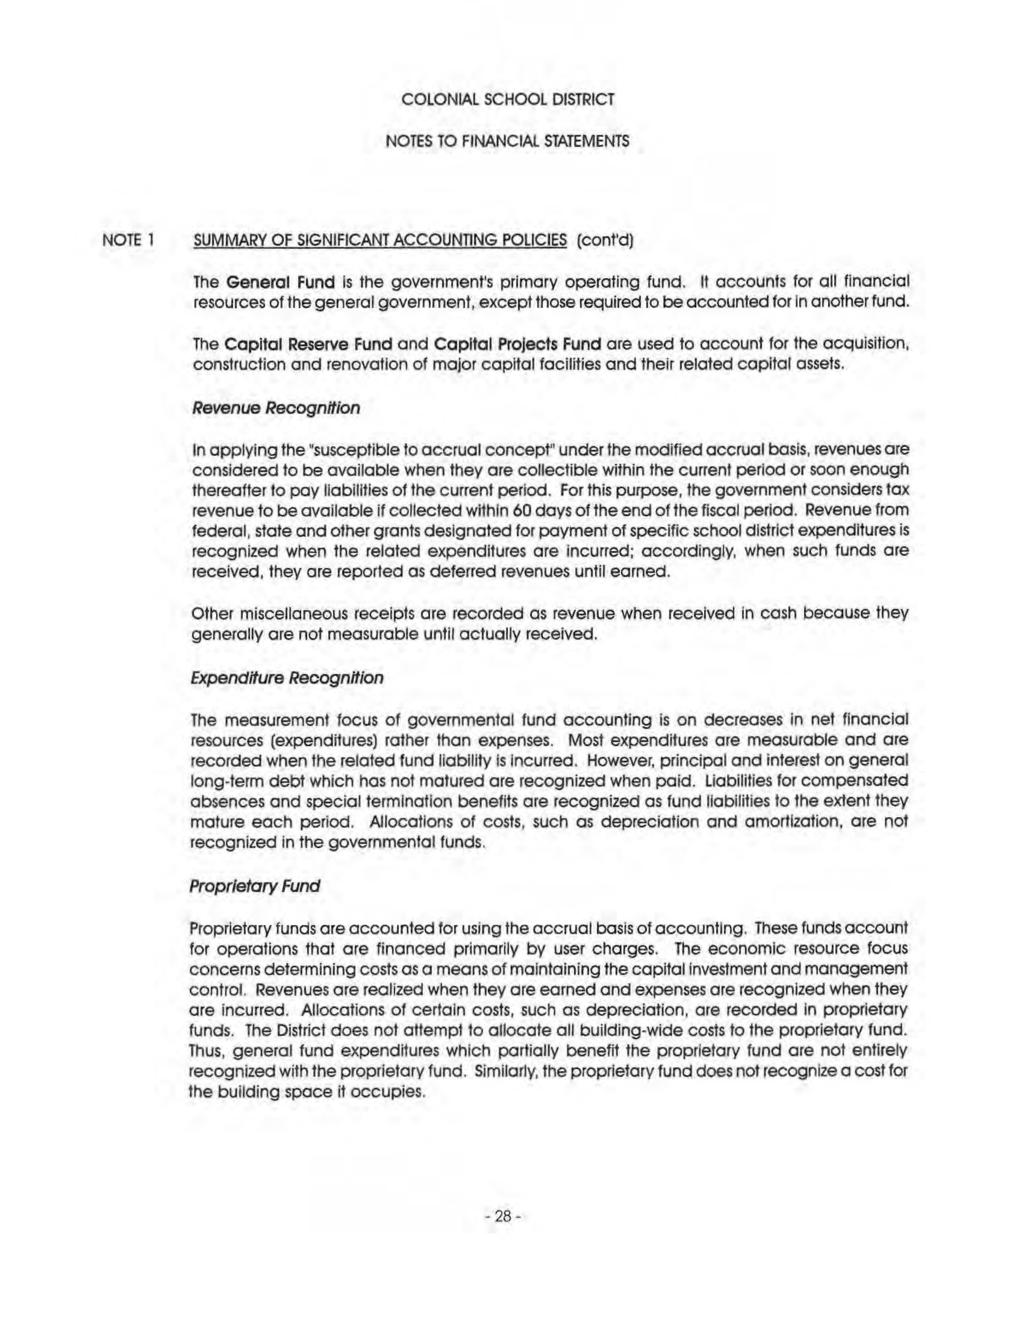 COLONIAL SCHOOL DISTRICT NOTES TO FINANCIAL STATEMENTS NOTE 1 SUMMARY OF SIGNIFICANT ACCOUNTING POLICIES (cont'd) The General Fund is the government's primary operating fund.